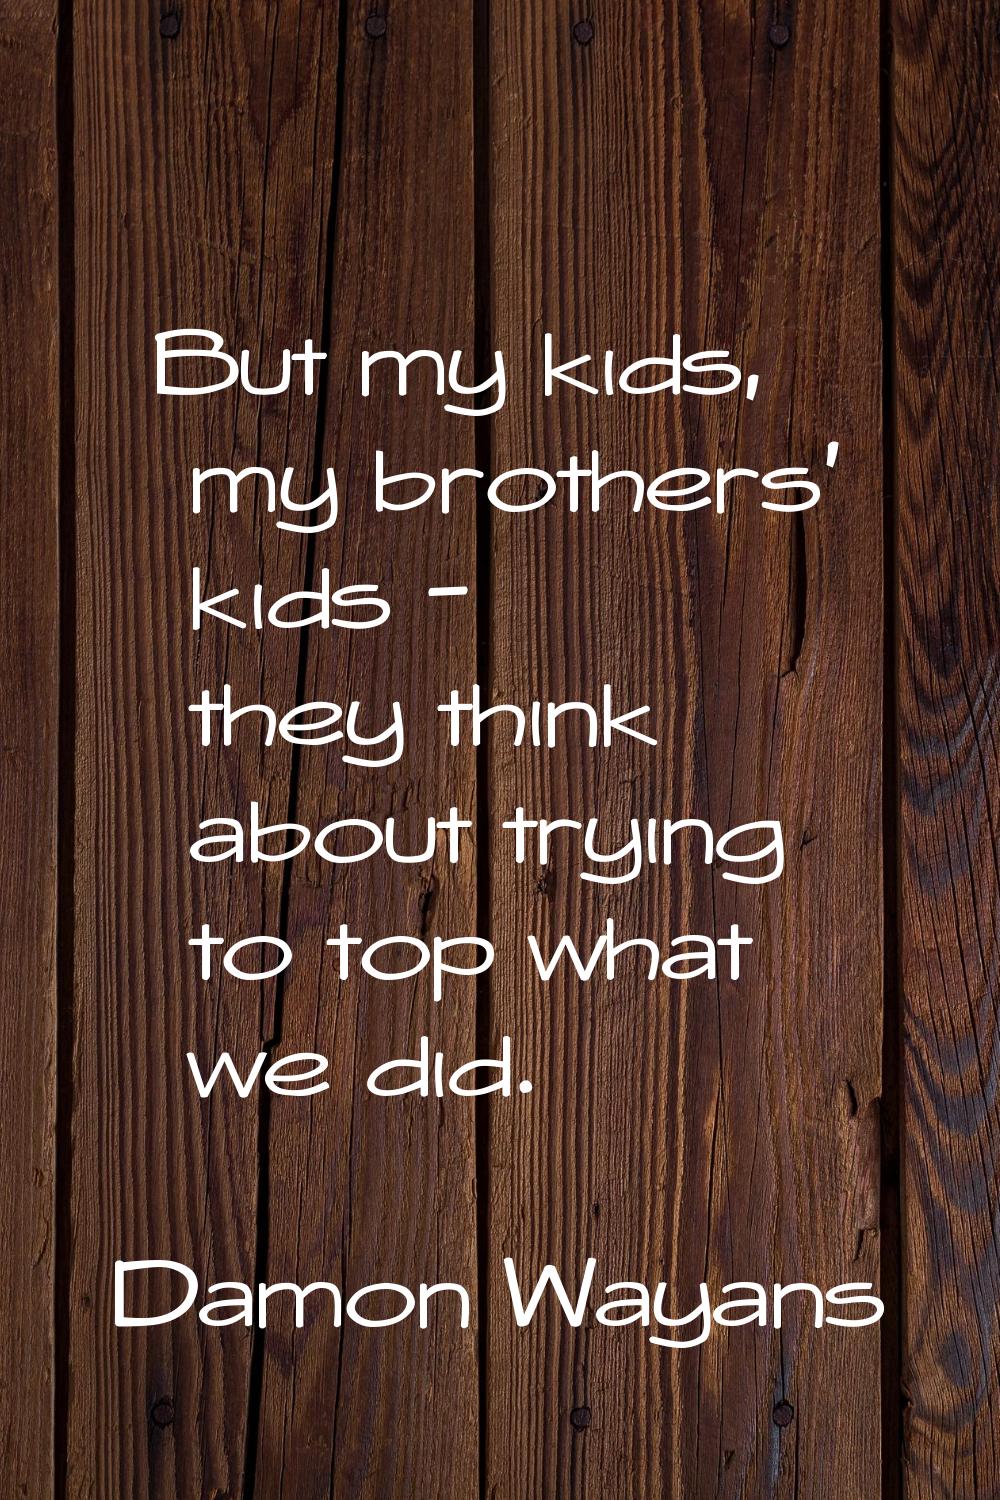 But my kids, my brothers' kids - they think about trying to top what we did.